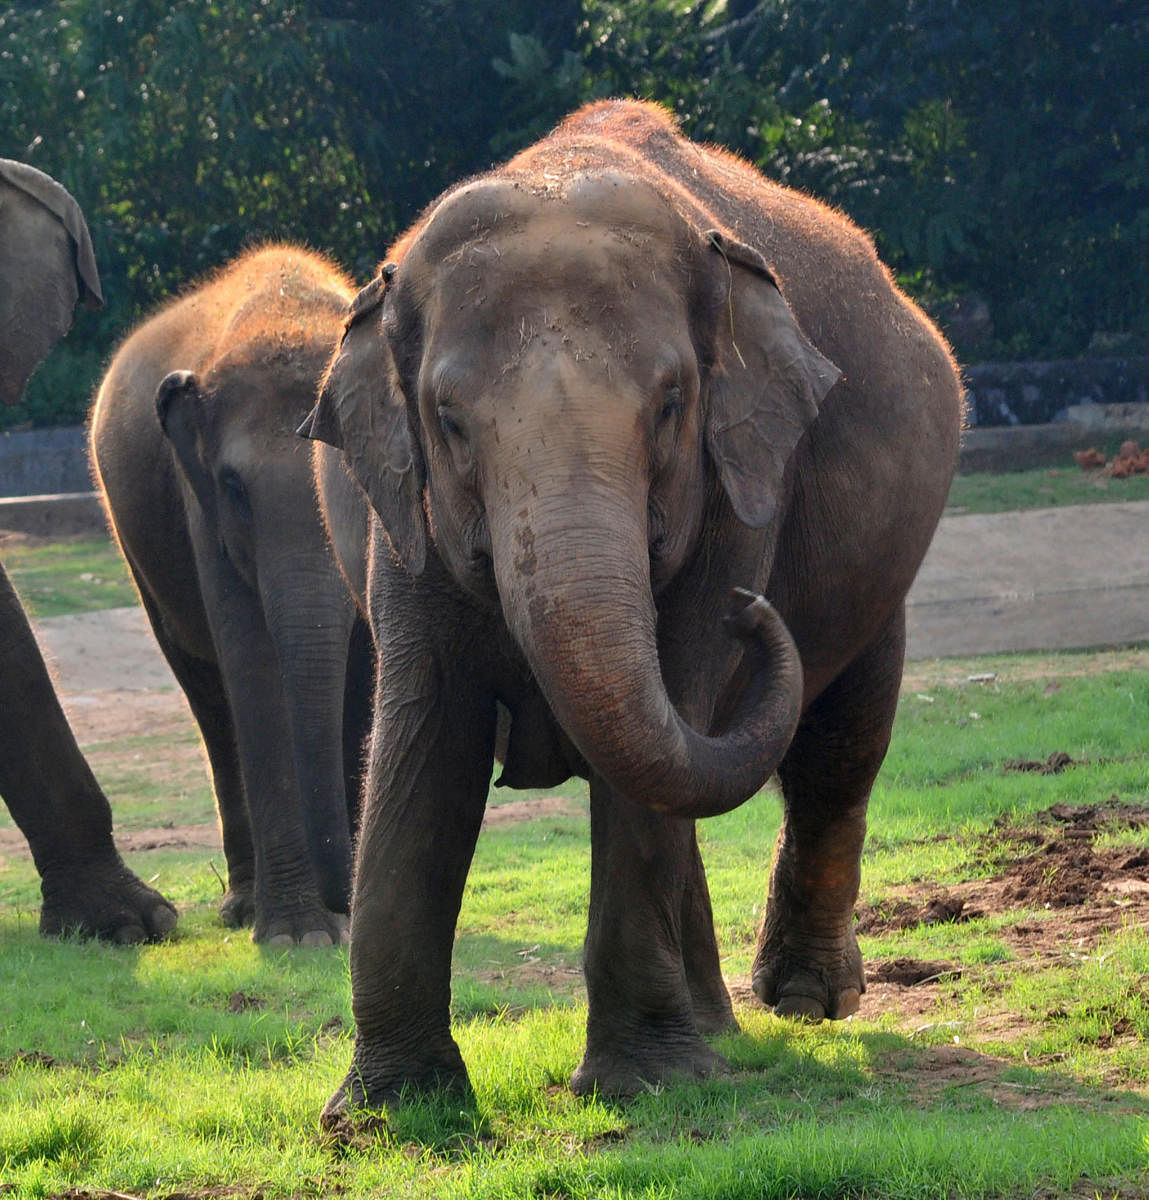 India is home to an estimated 27,312 elephants, according to the 2017 elephant census.